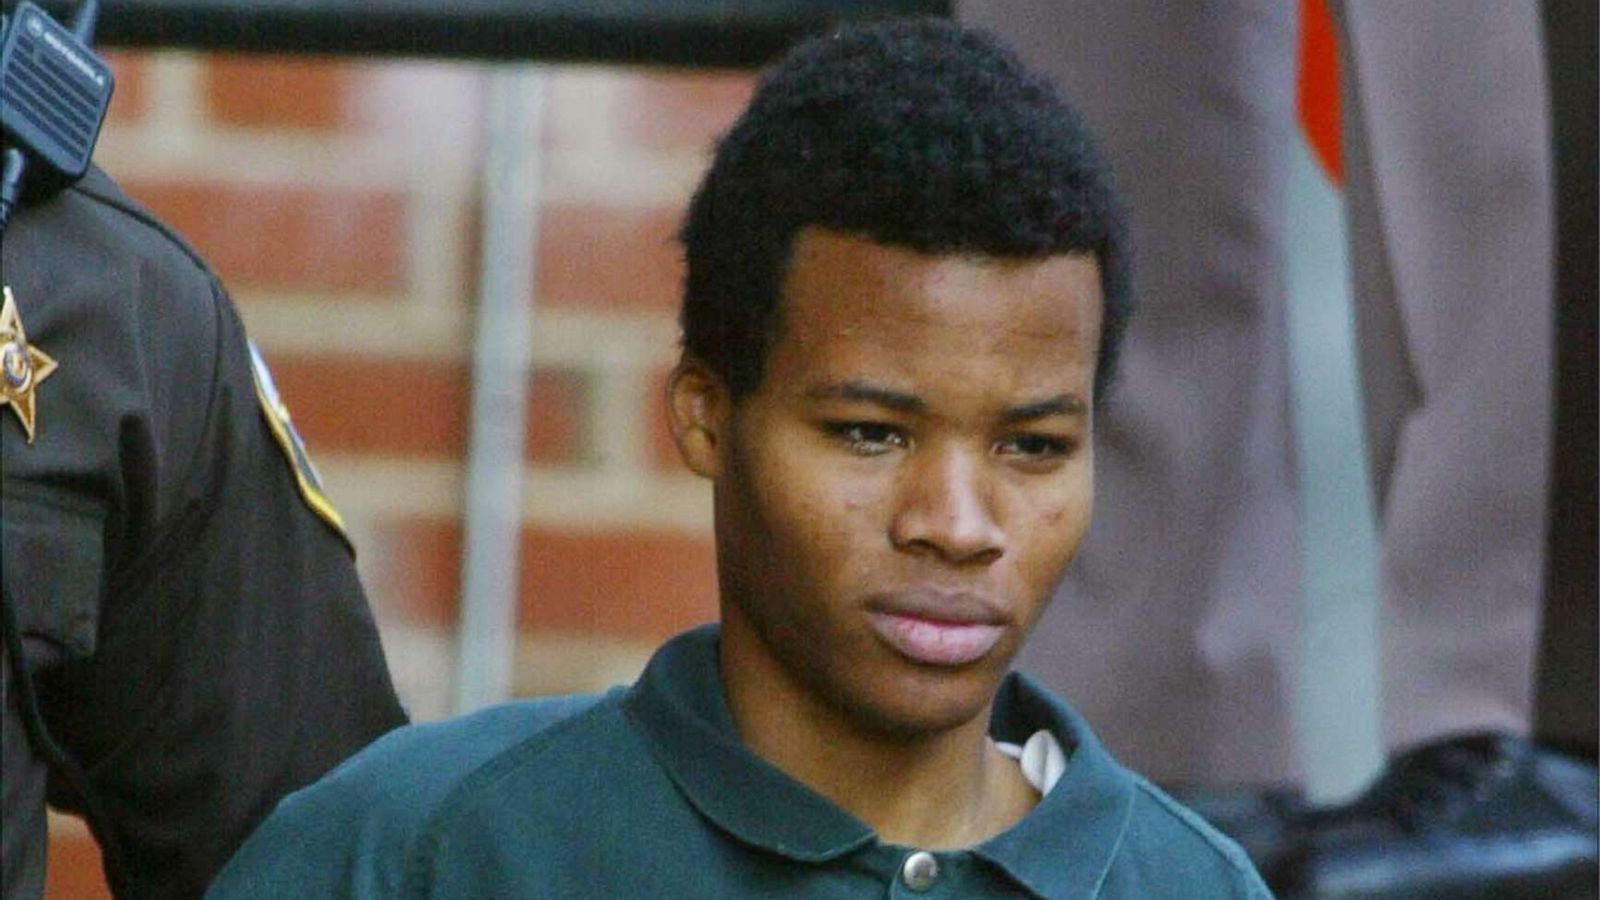 D.C. sniper's case for reconsideration is heard by Maryland